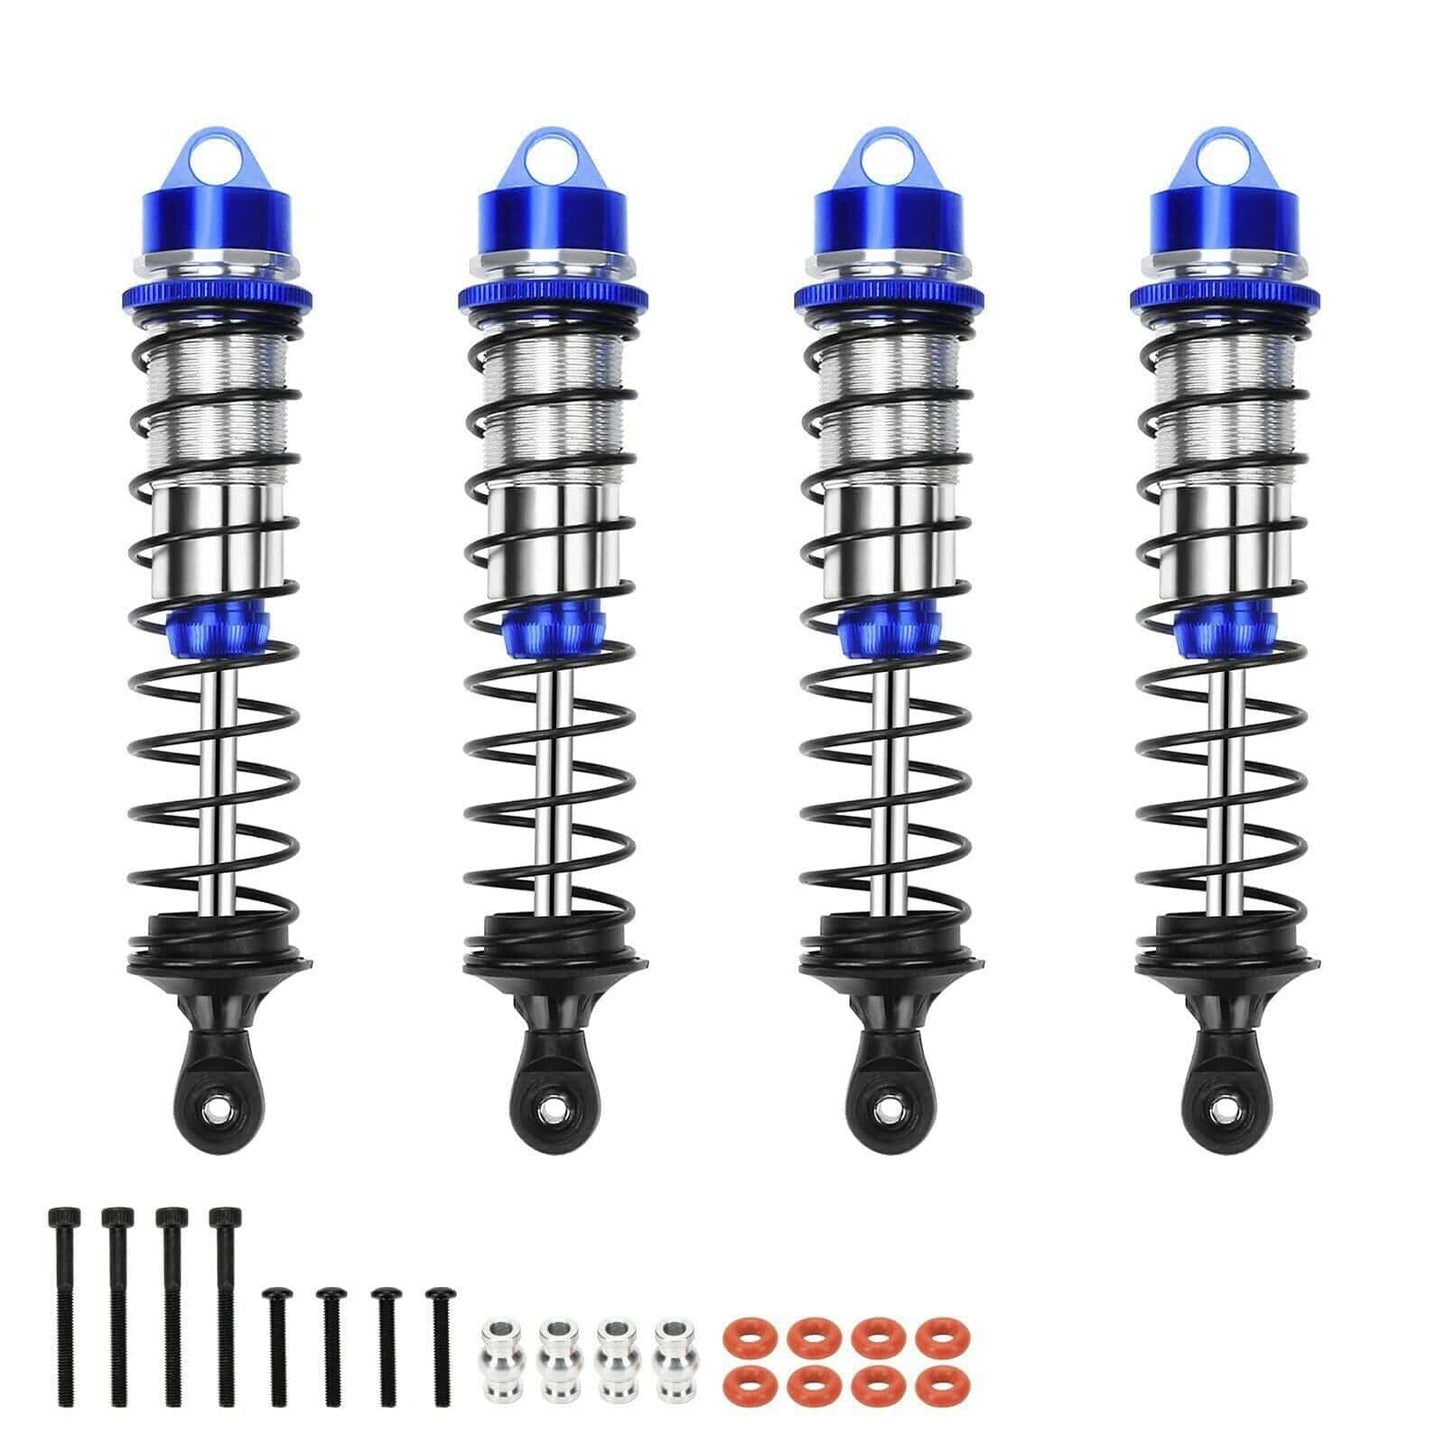 RCAWD TRAXXAS MAXX RCAWD Metal Shocks Absorber oil-filled type 8961 for Maxx upgrades